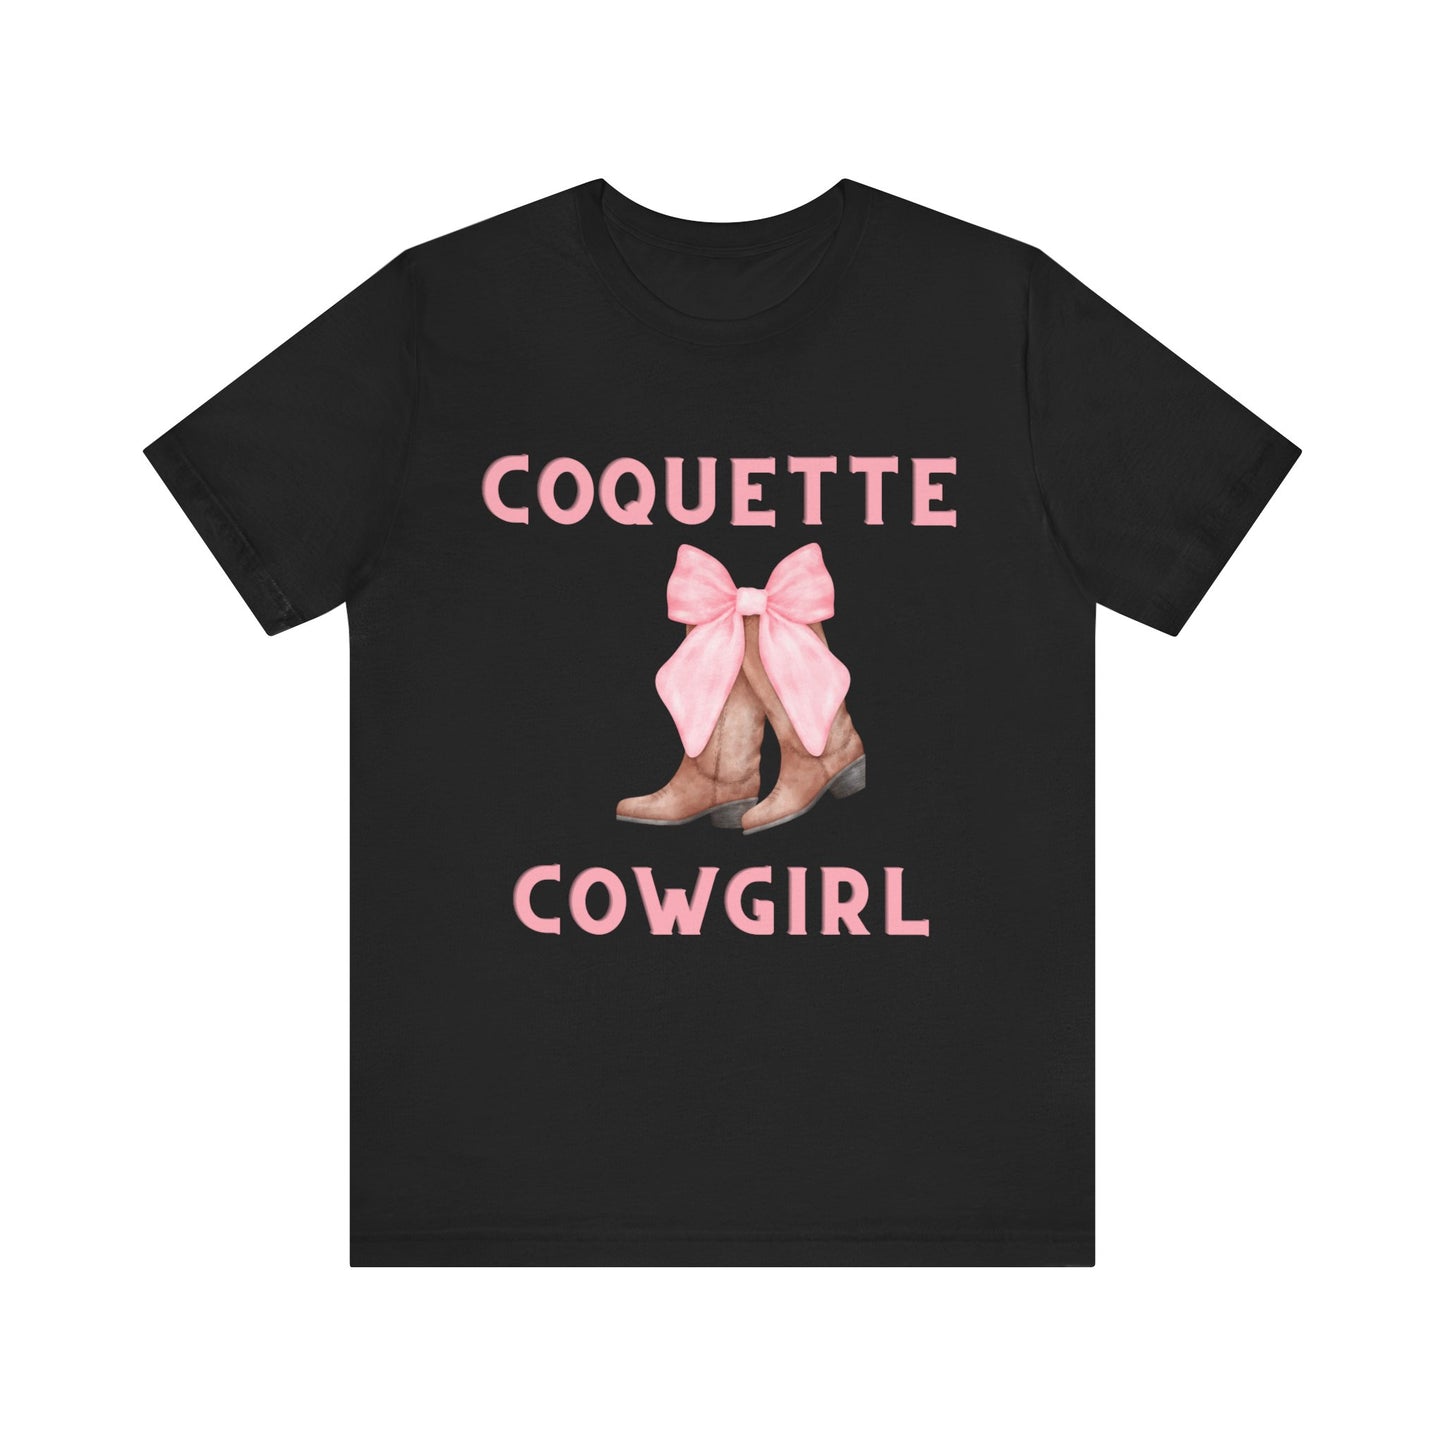 Coquette Cowgirl Bow & Boots Women's Jersey Short Sleeved Tee Size S-2xl